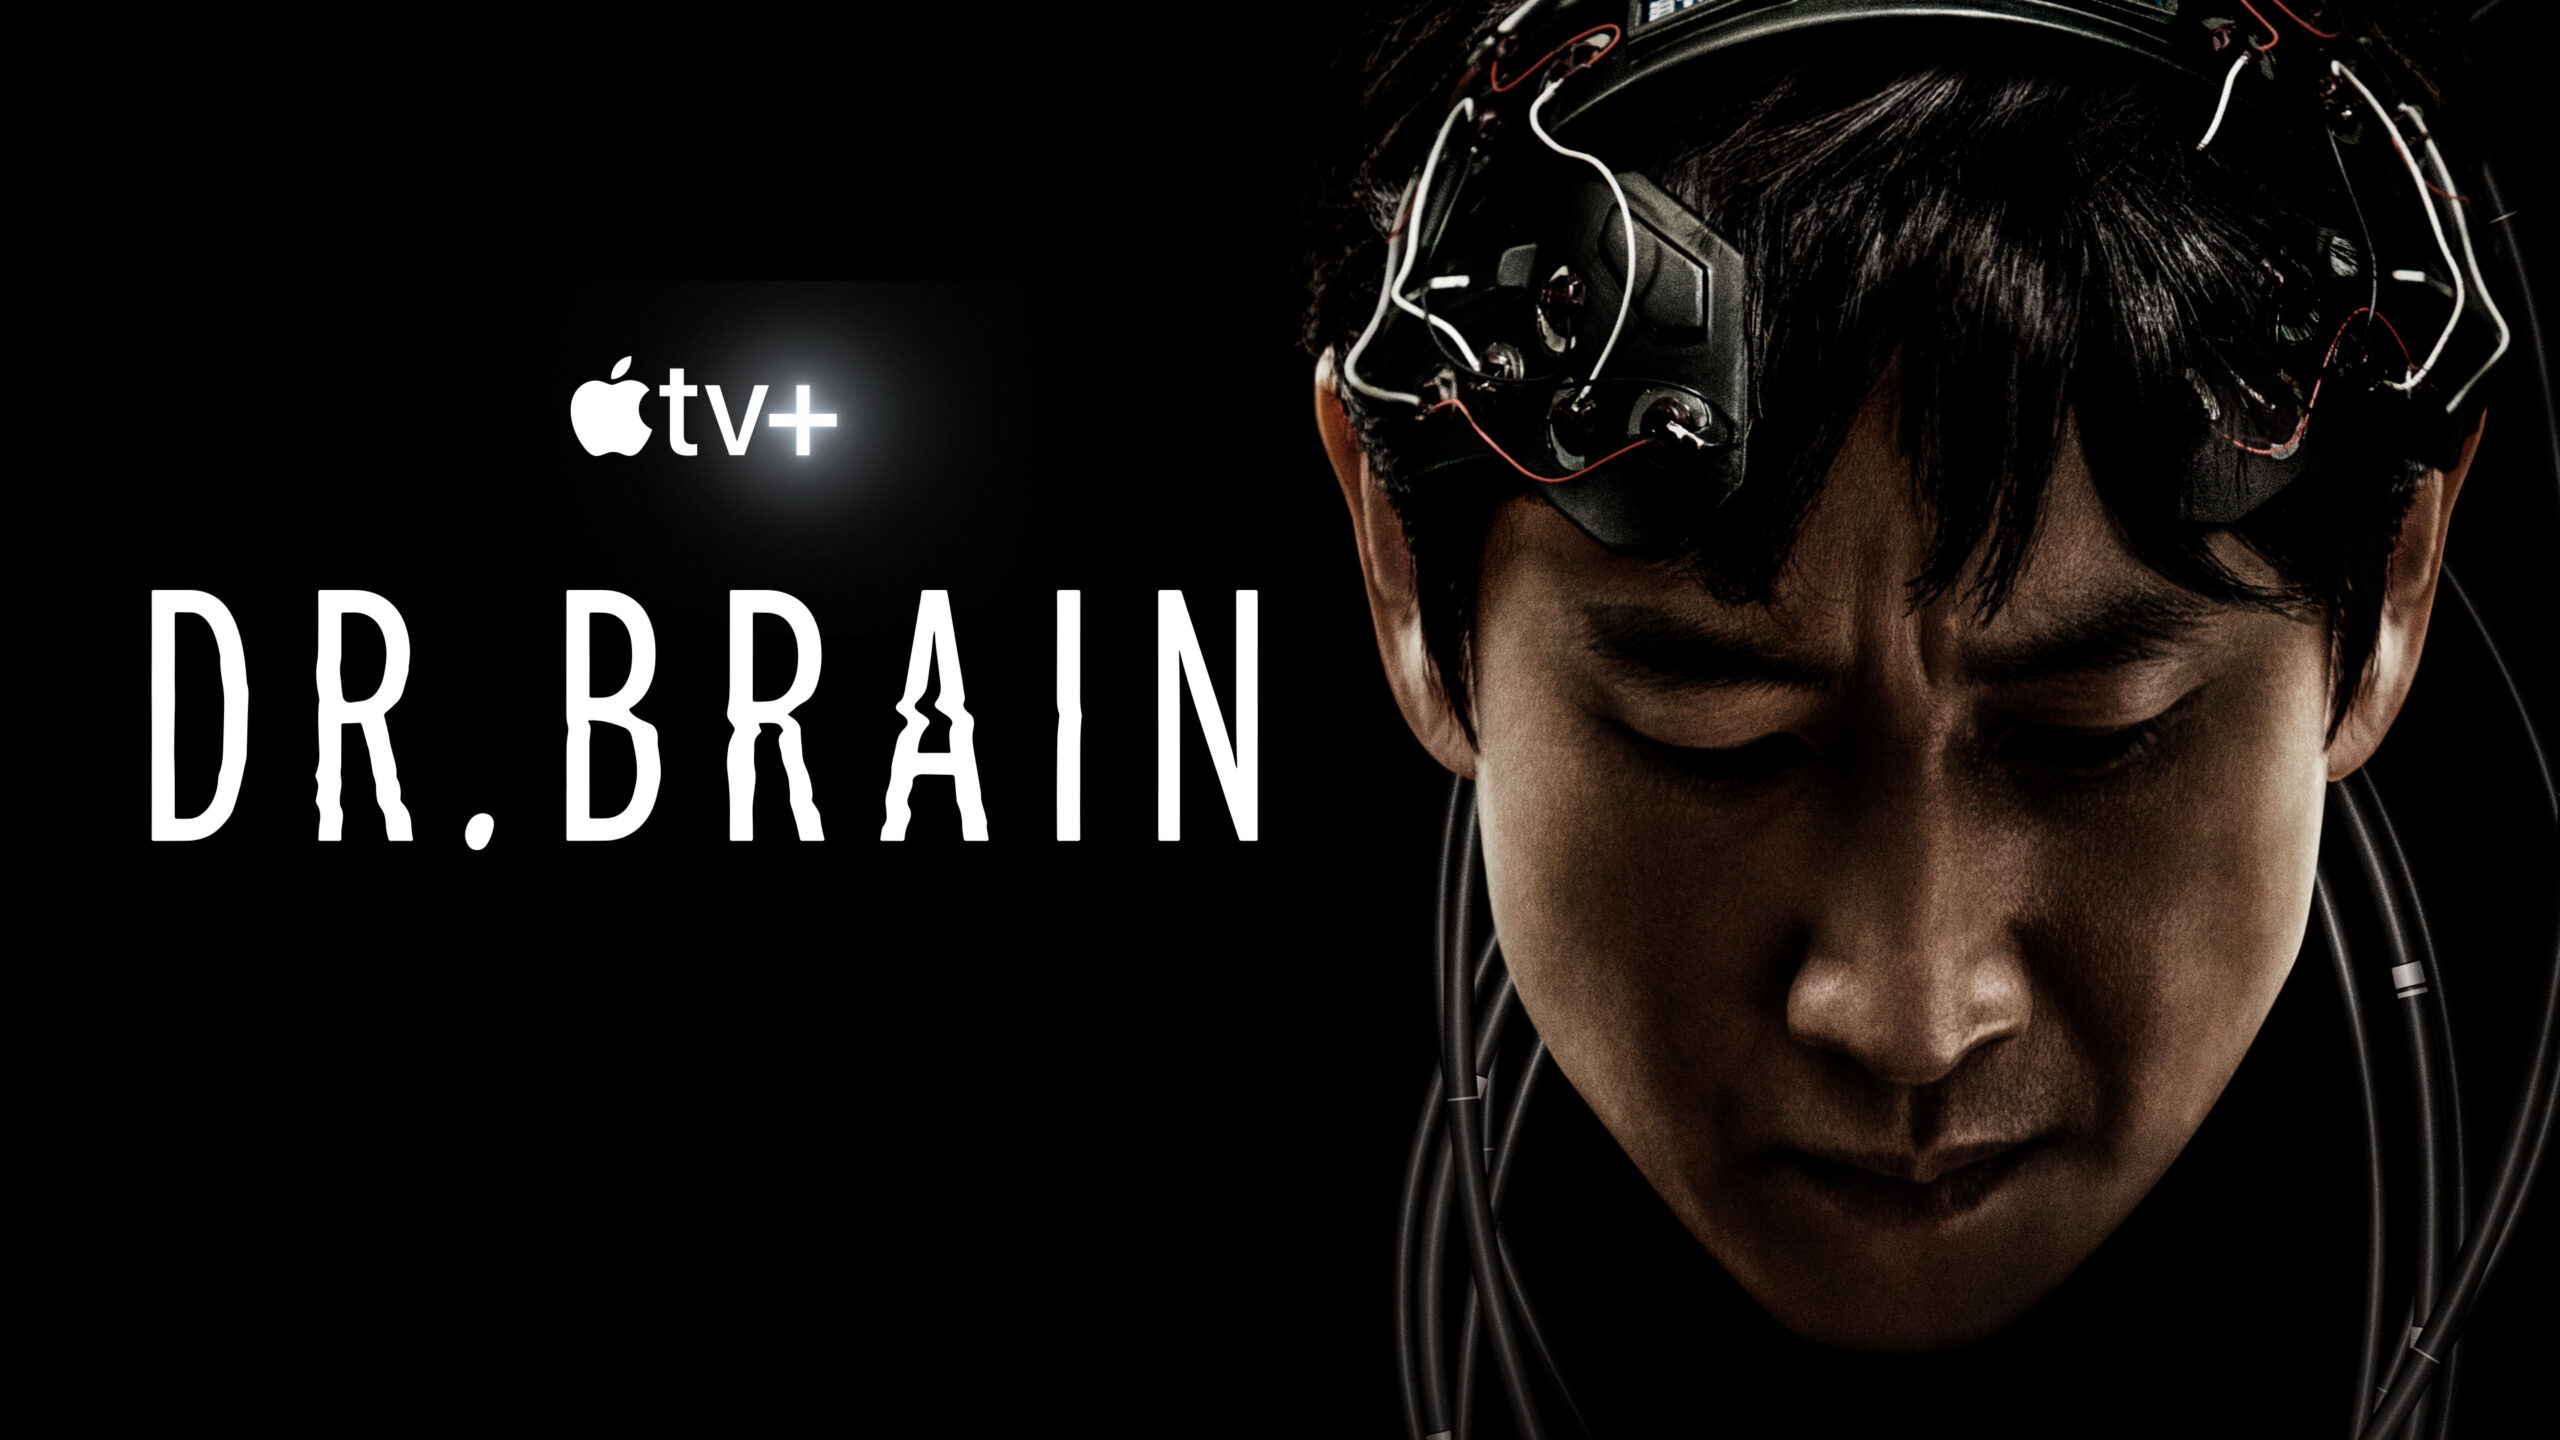 Poster Dr. Brain [credit: courtesy of Apple]